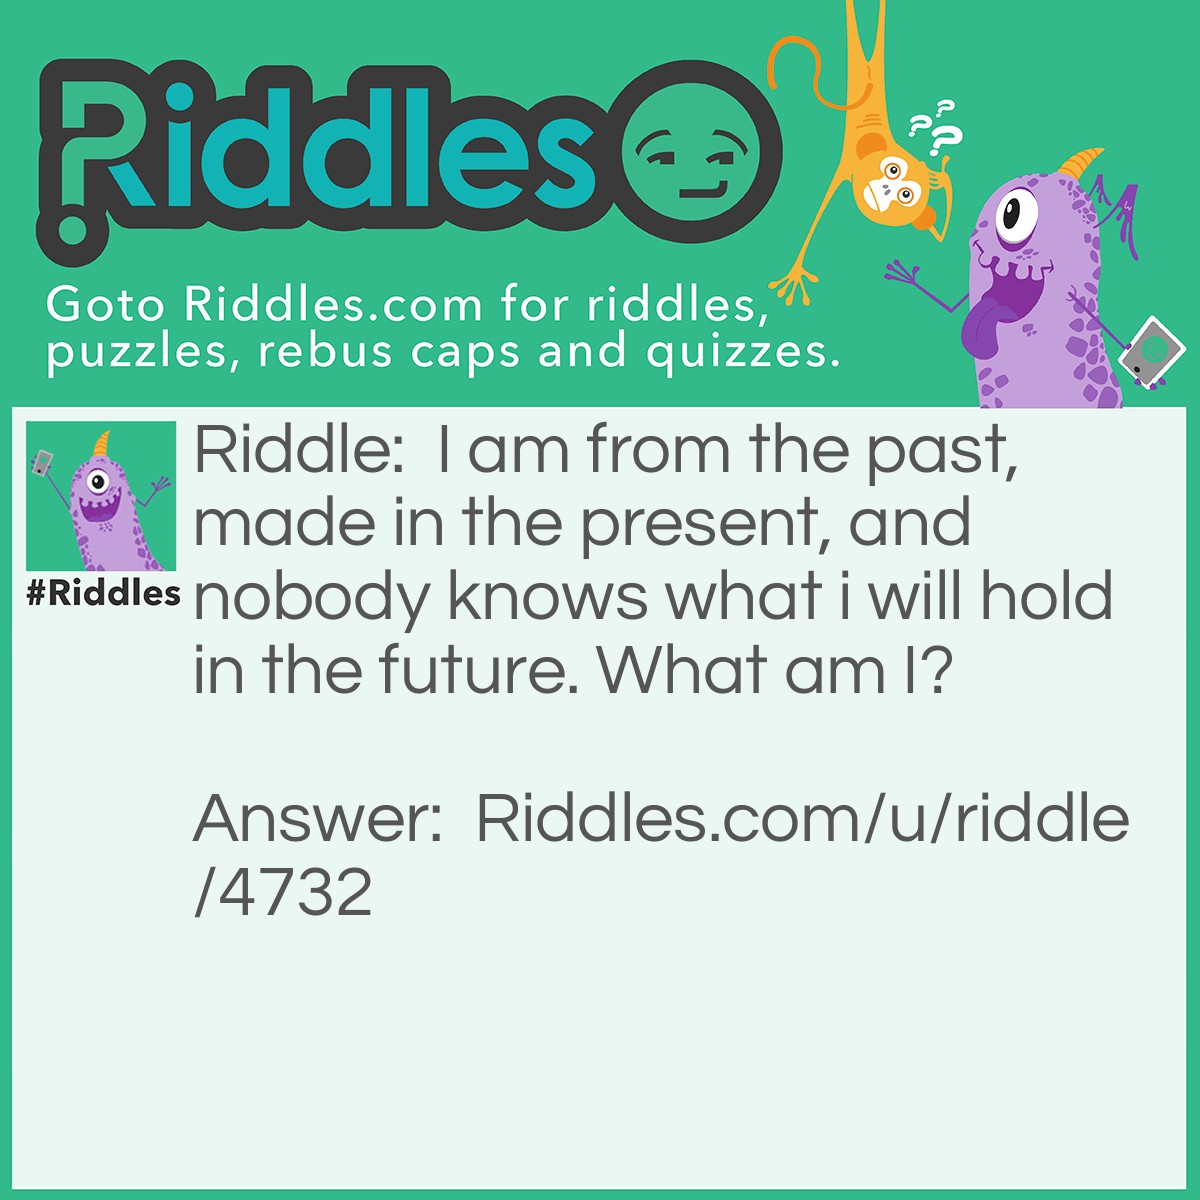 Riddle: I am from the past, made in the present, and nobody knows what i will hold in the future. What am I? Answer: History.